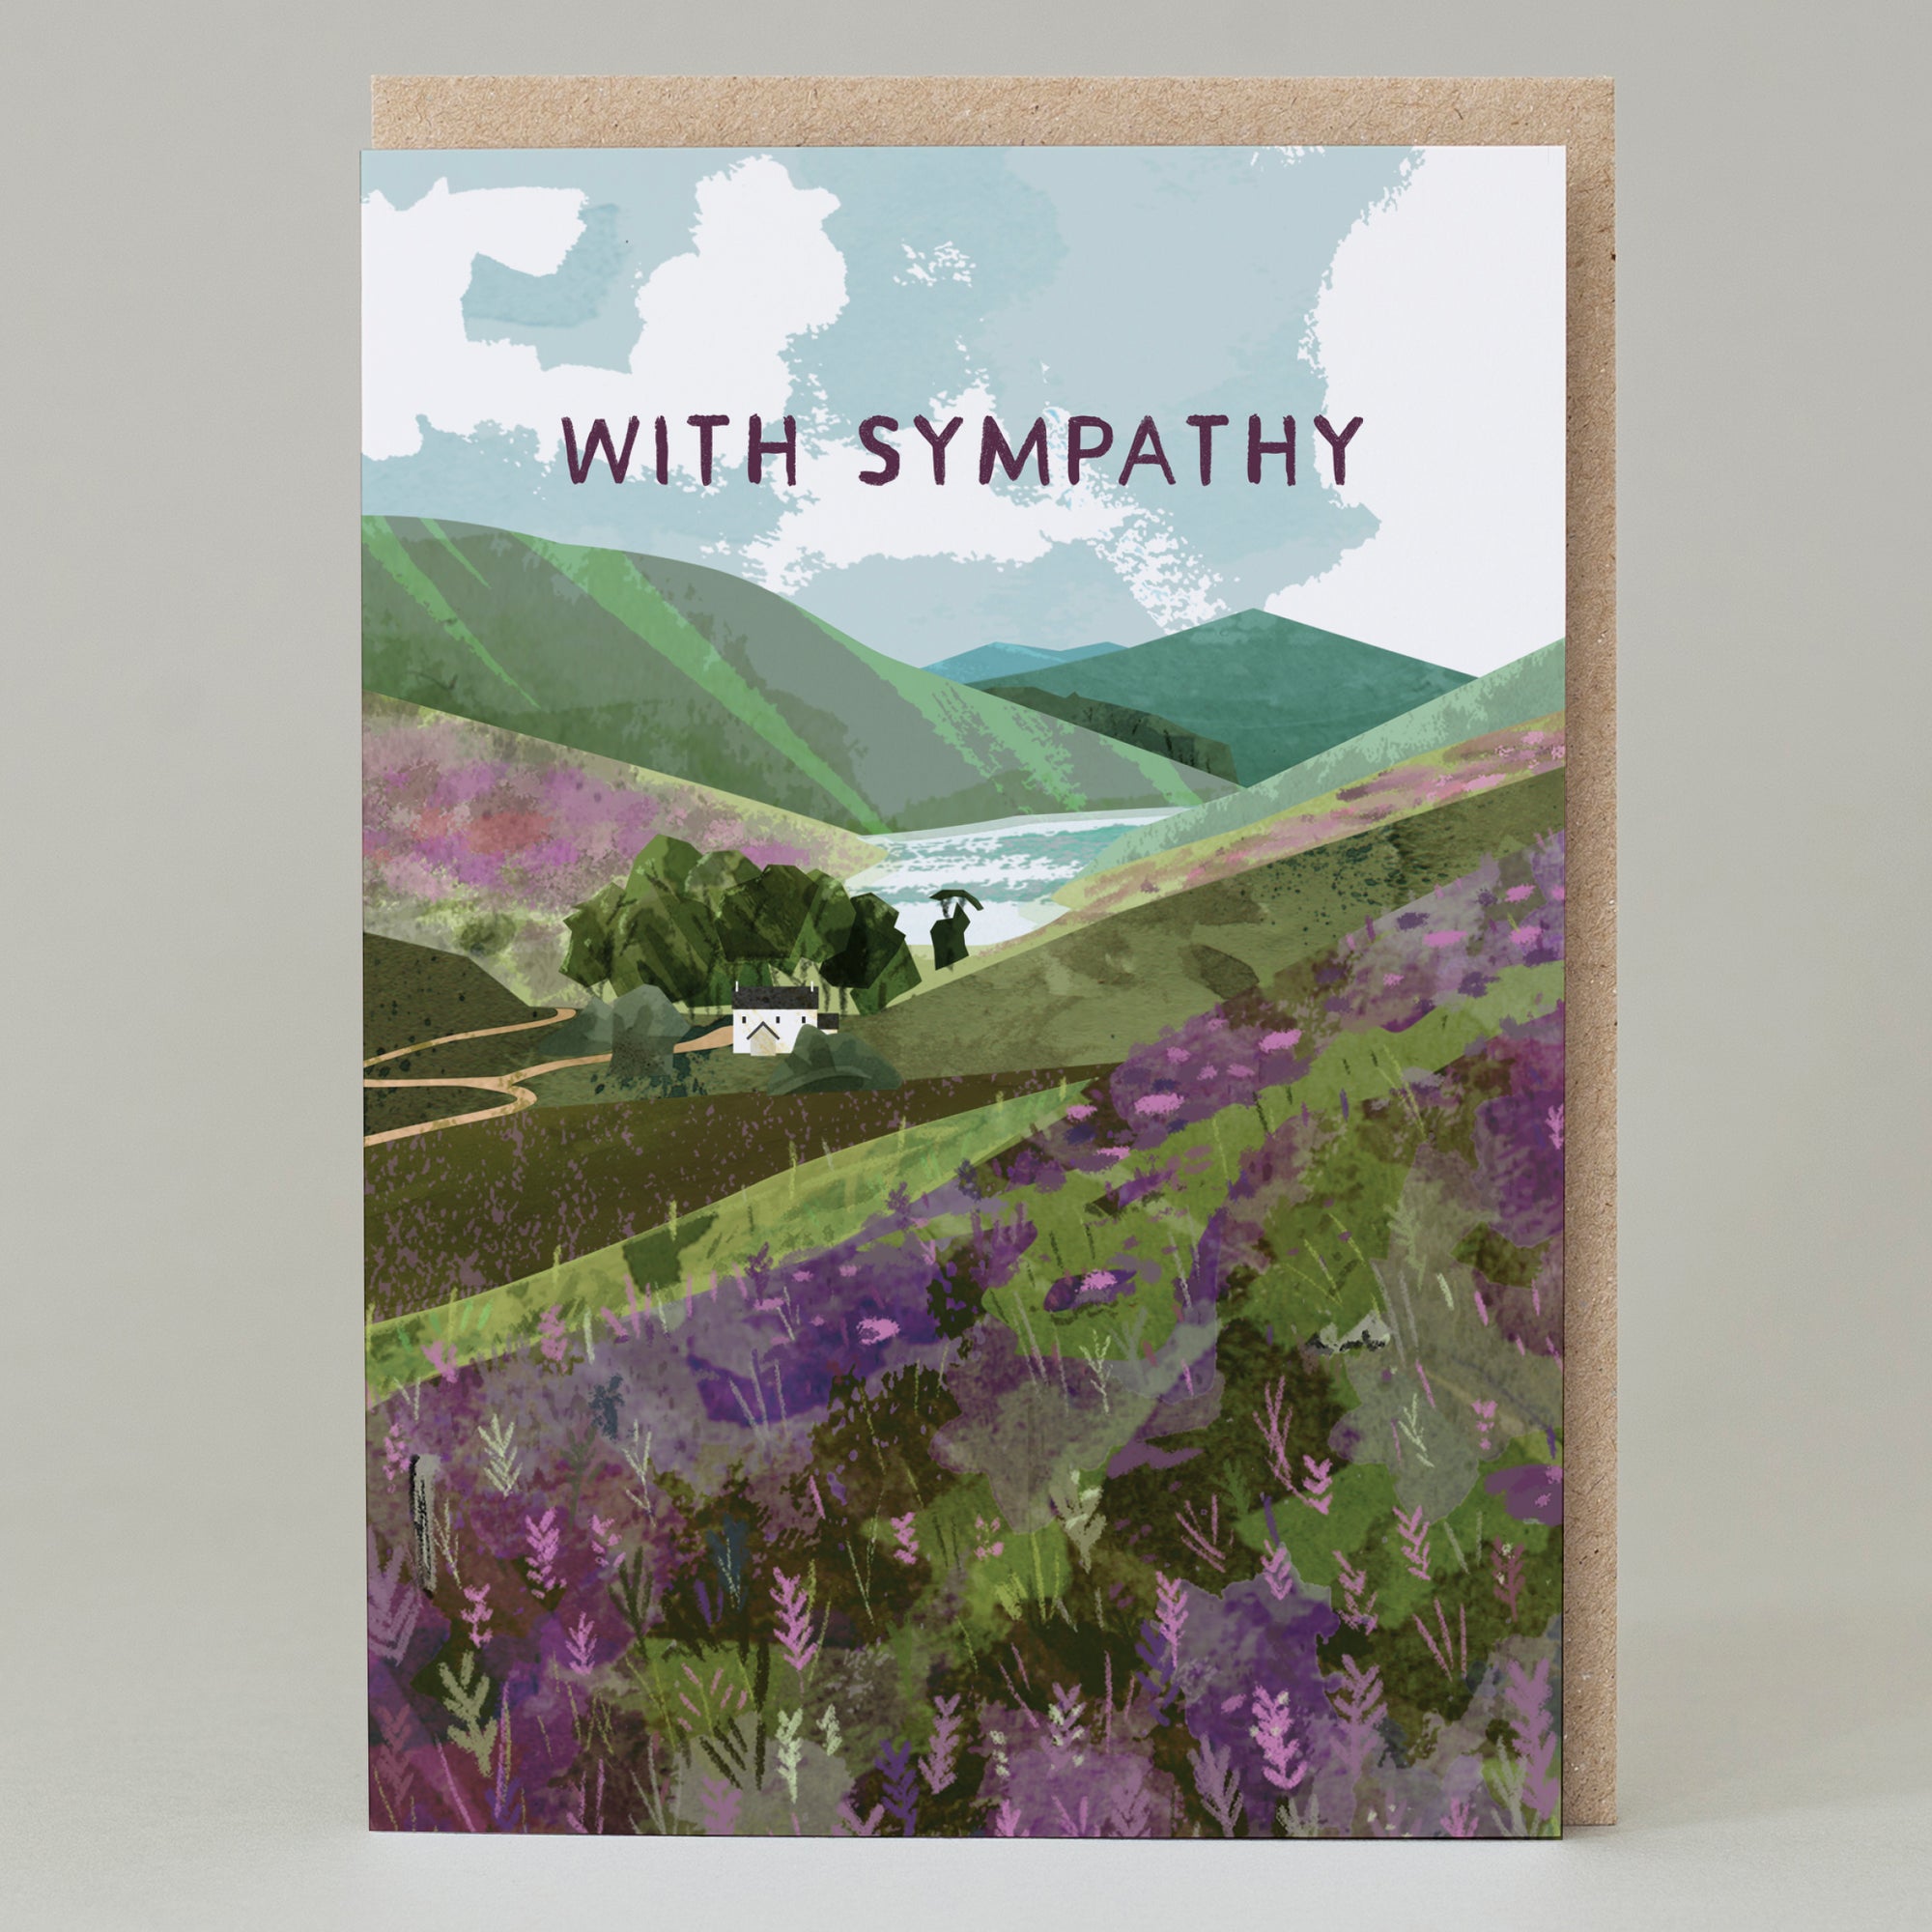 A greetings card featuring purple capital letters saying With Sympathy in the sky of a hilly landscape. There is purple heather on the hillsides, leading down to a track and a cottage overlooking a loch.